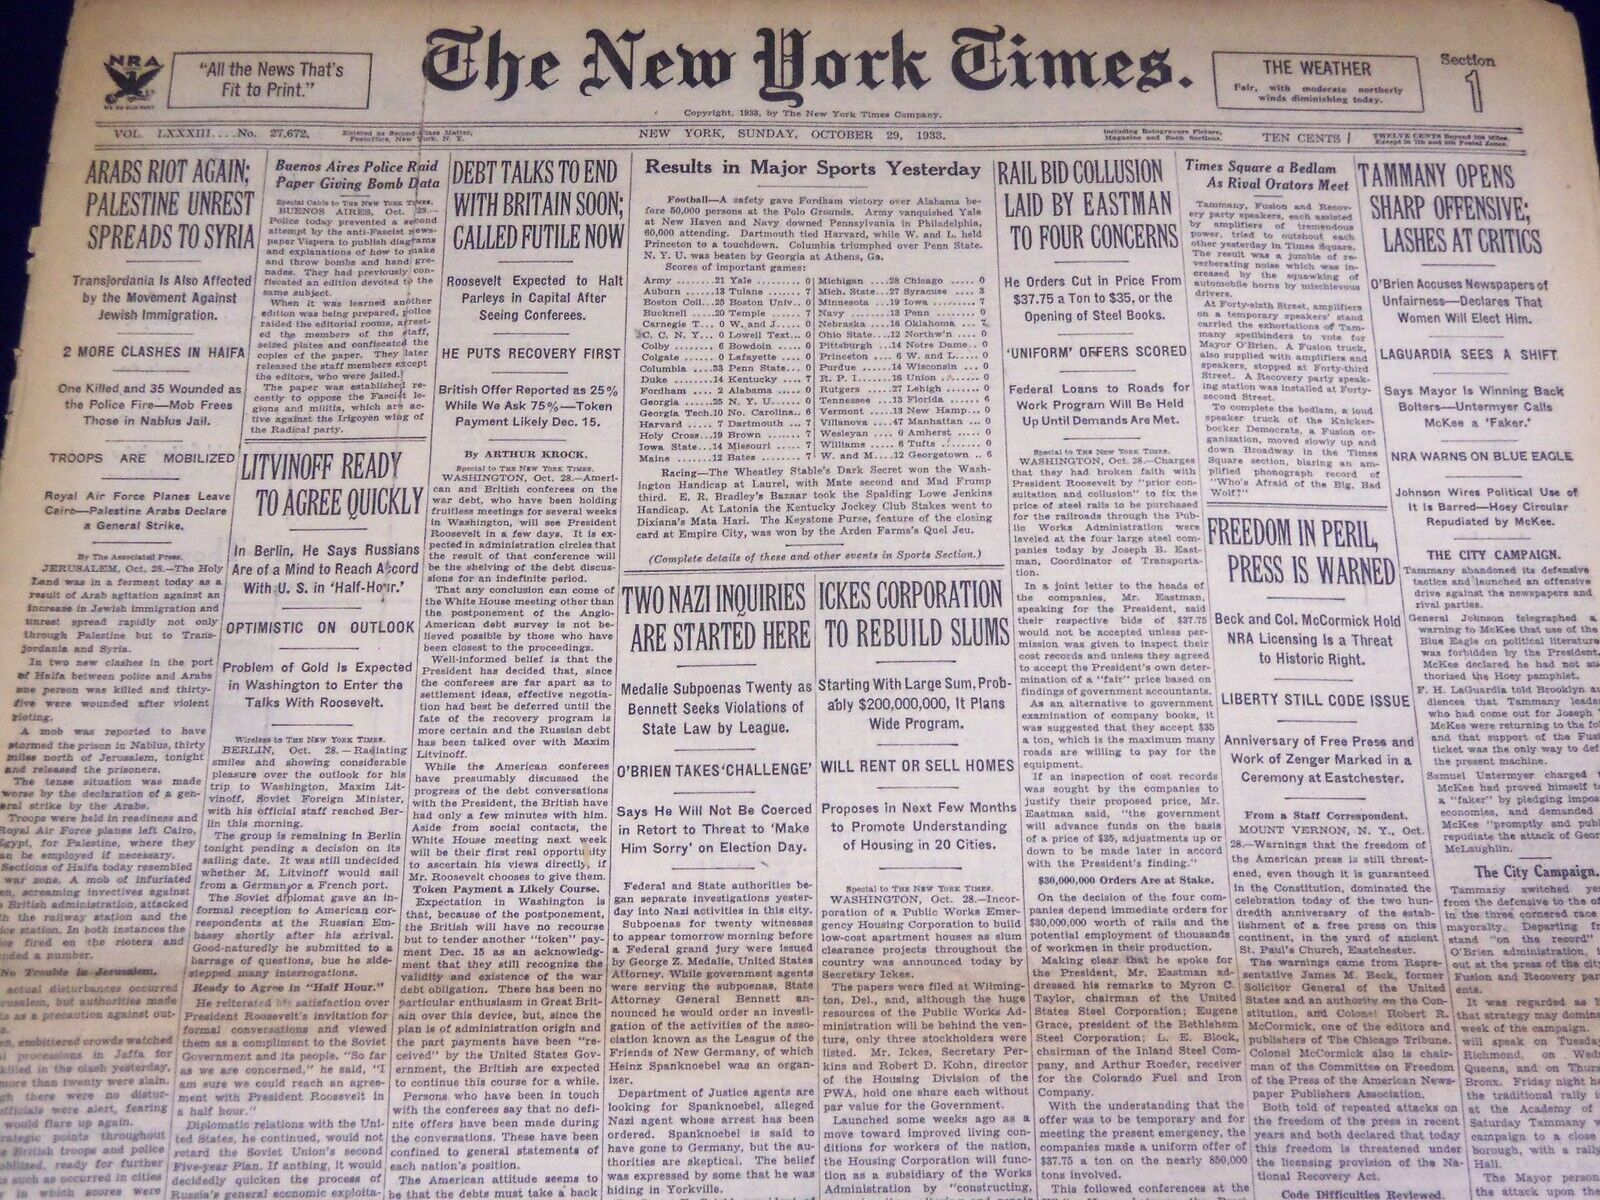 1933 OCTOBER 29 NEW YORK TIMES - NAZI INQUIRIES STARTED HERE - NT 3882